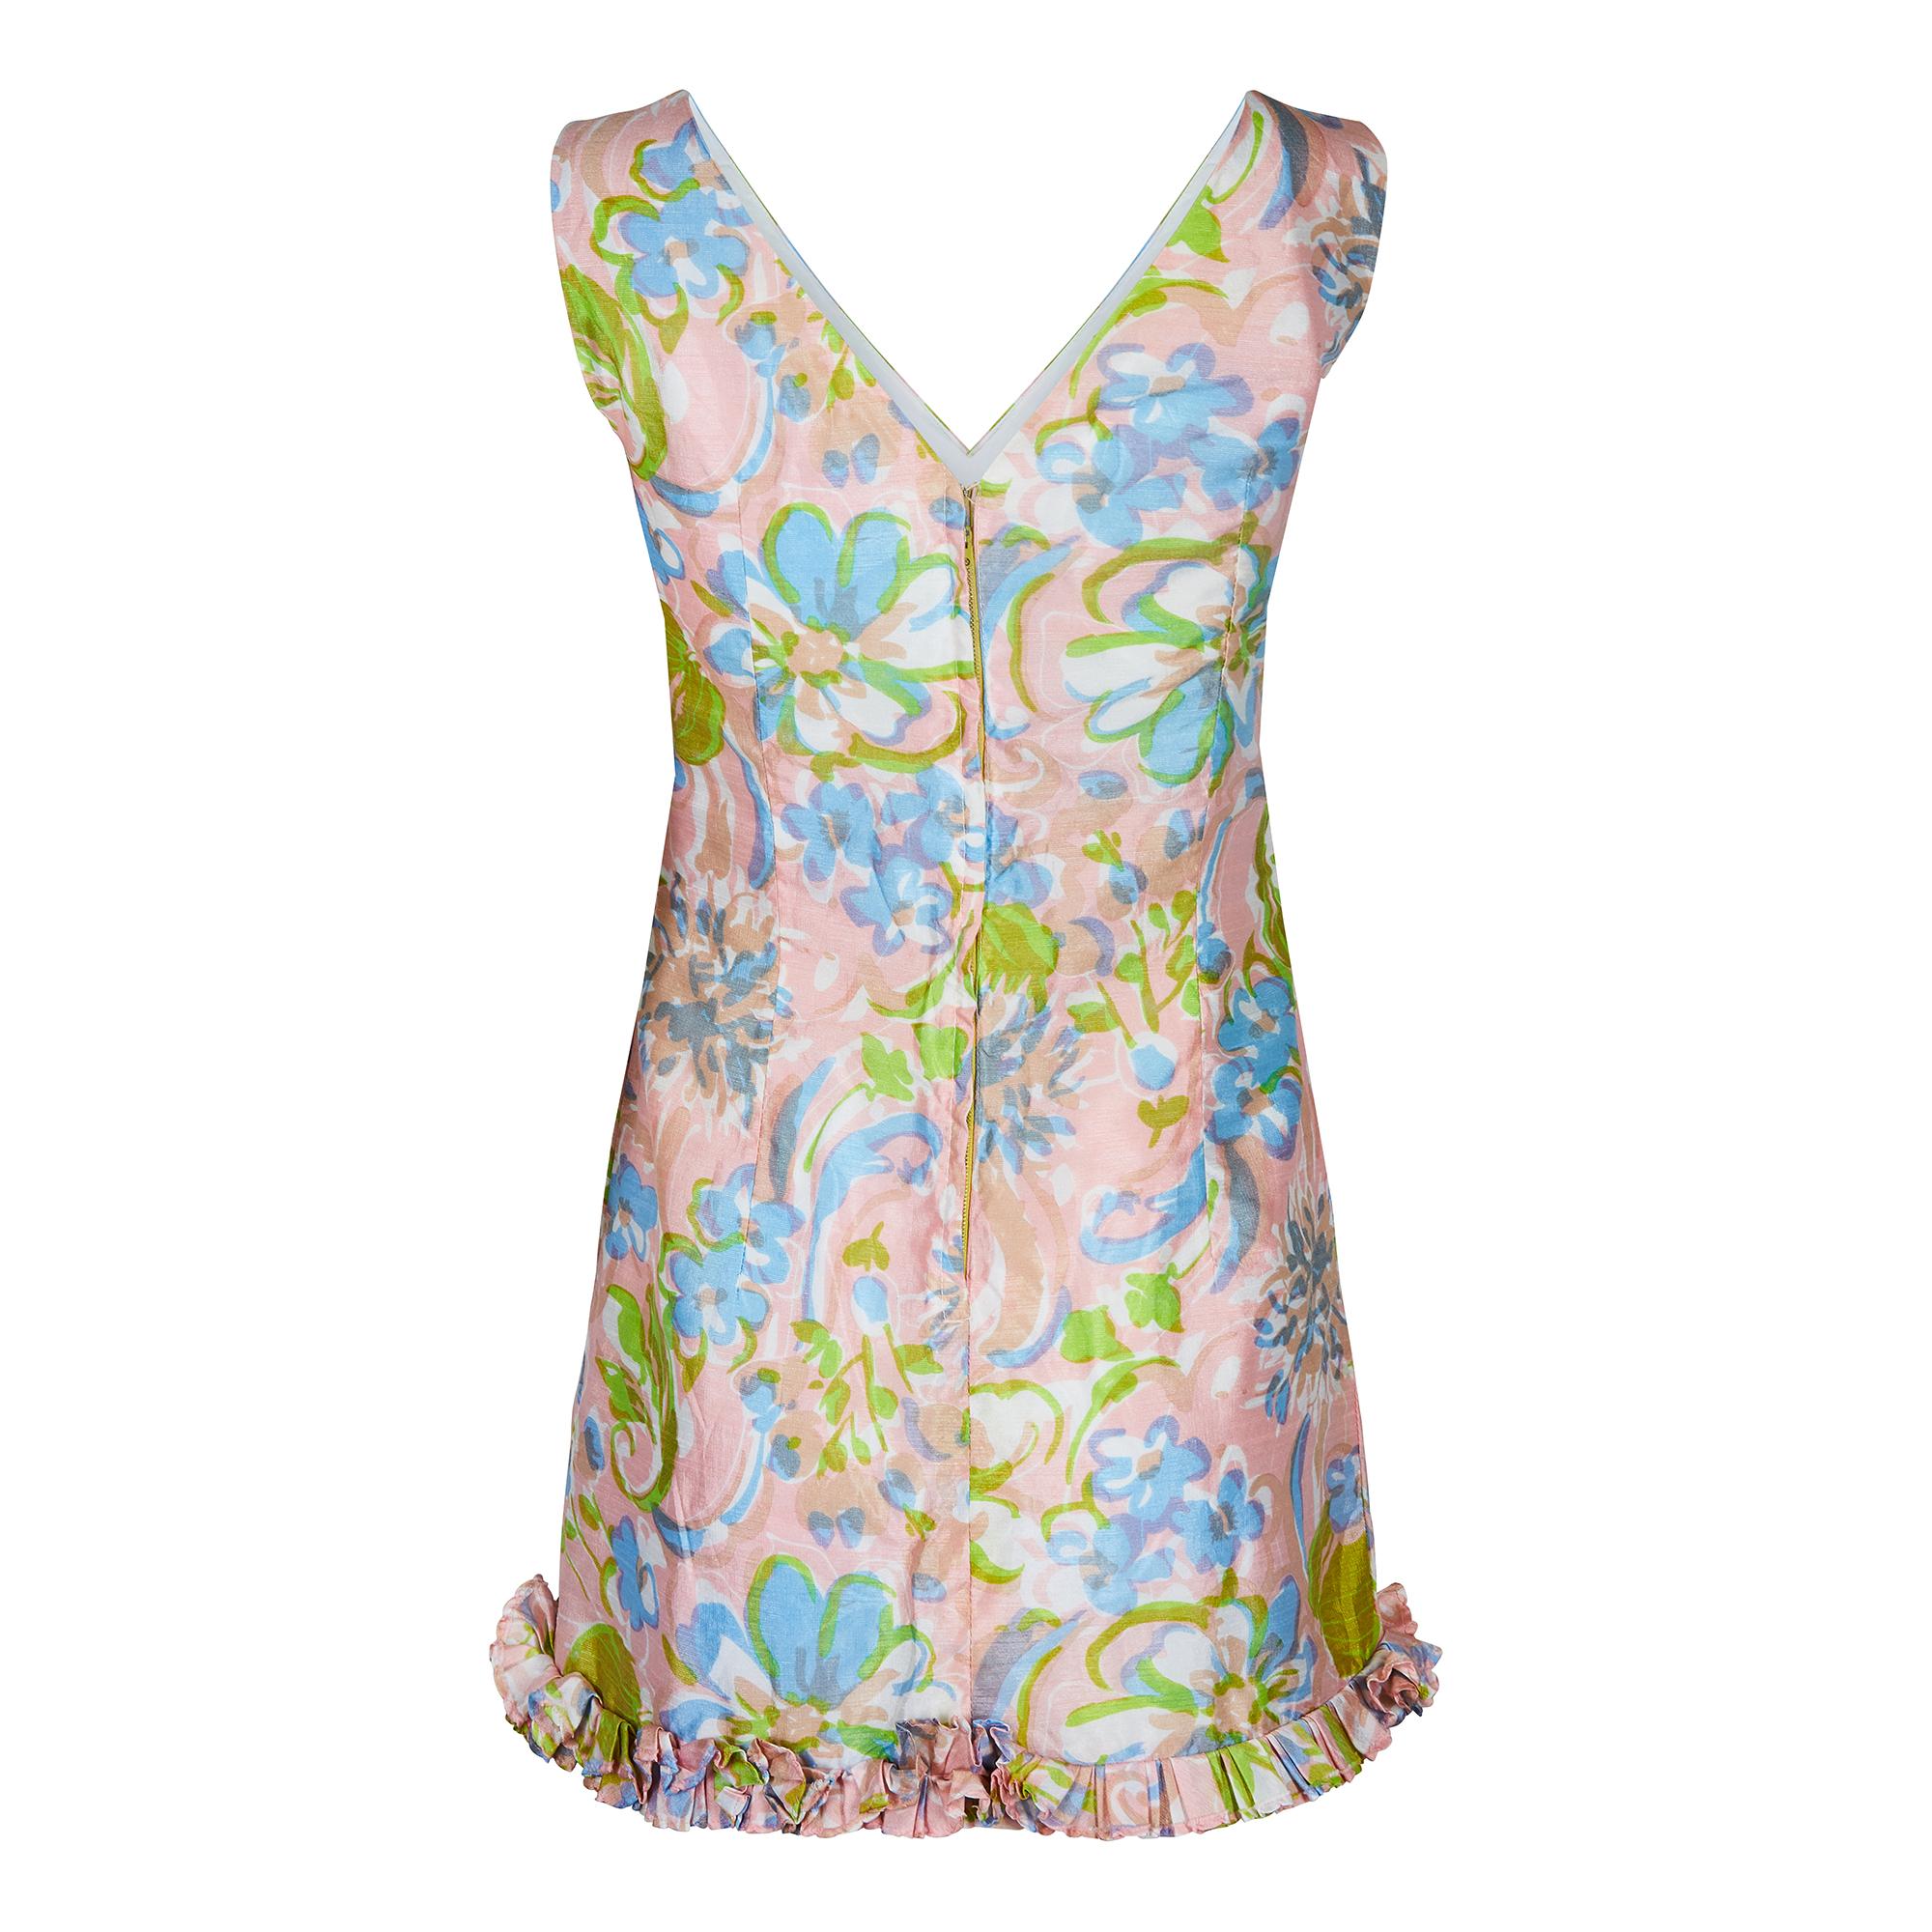 This is a good example of 1960s summer wear by quality British label Blanes. It has a very attractive abstract and painterly floral print in pastel hues of pink, green and sky blue. There are some great design features on this dress such as the